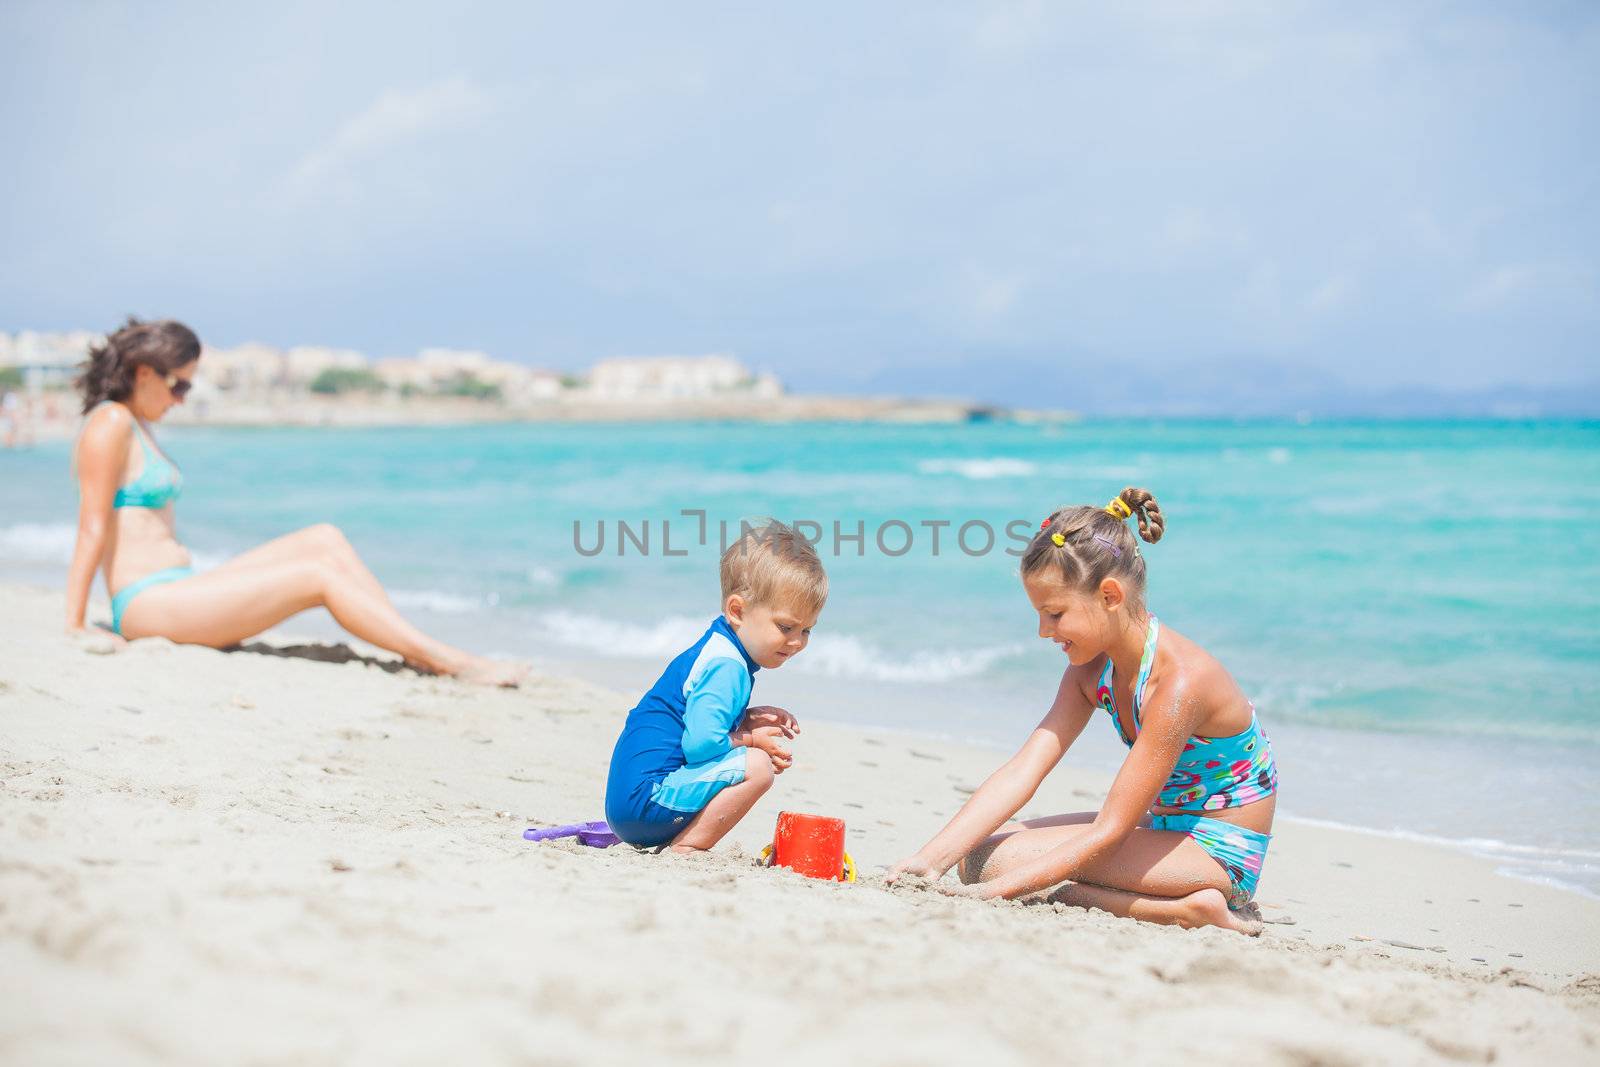 Photo of plaing two kids at beach wis his mother